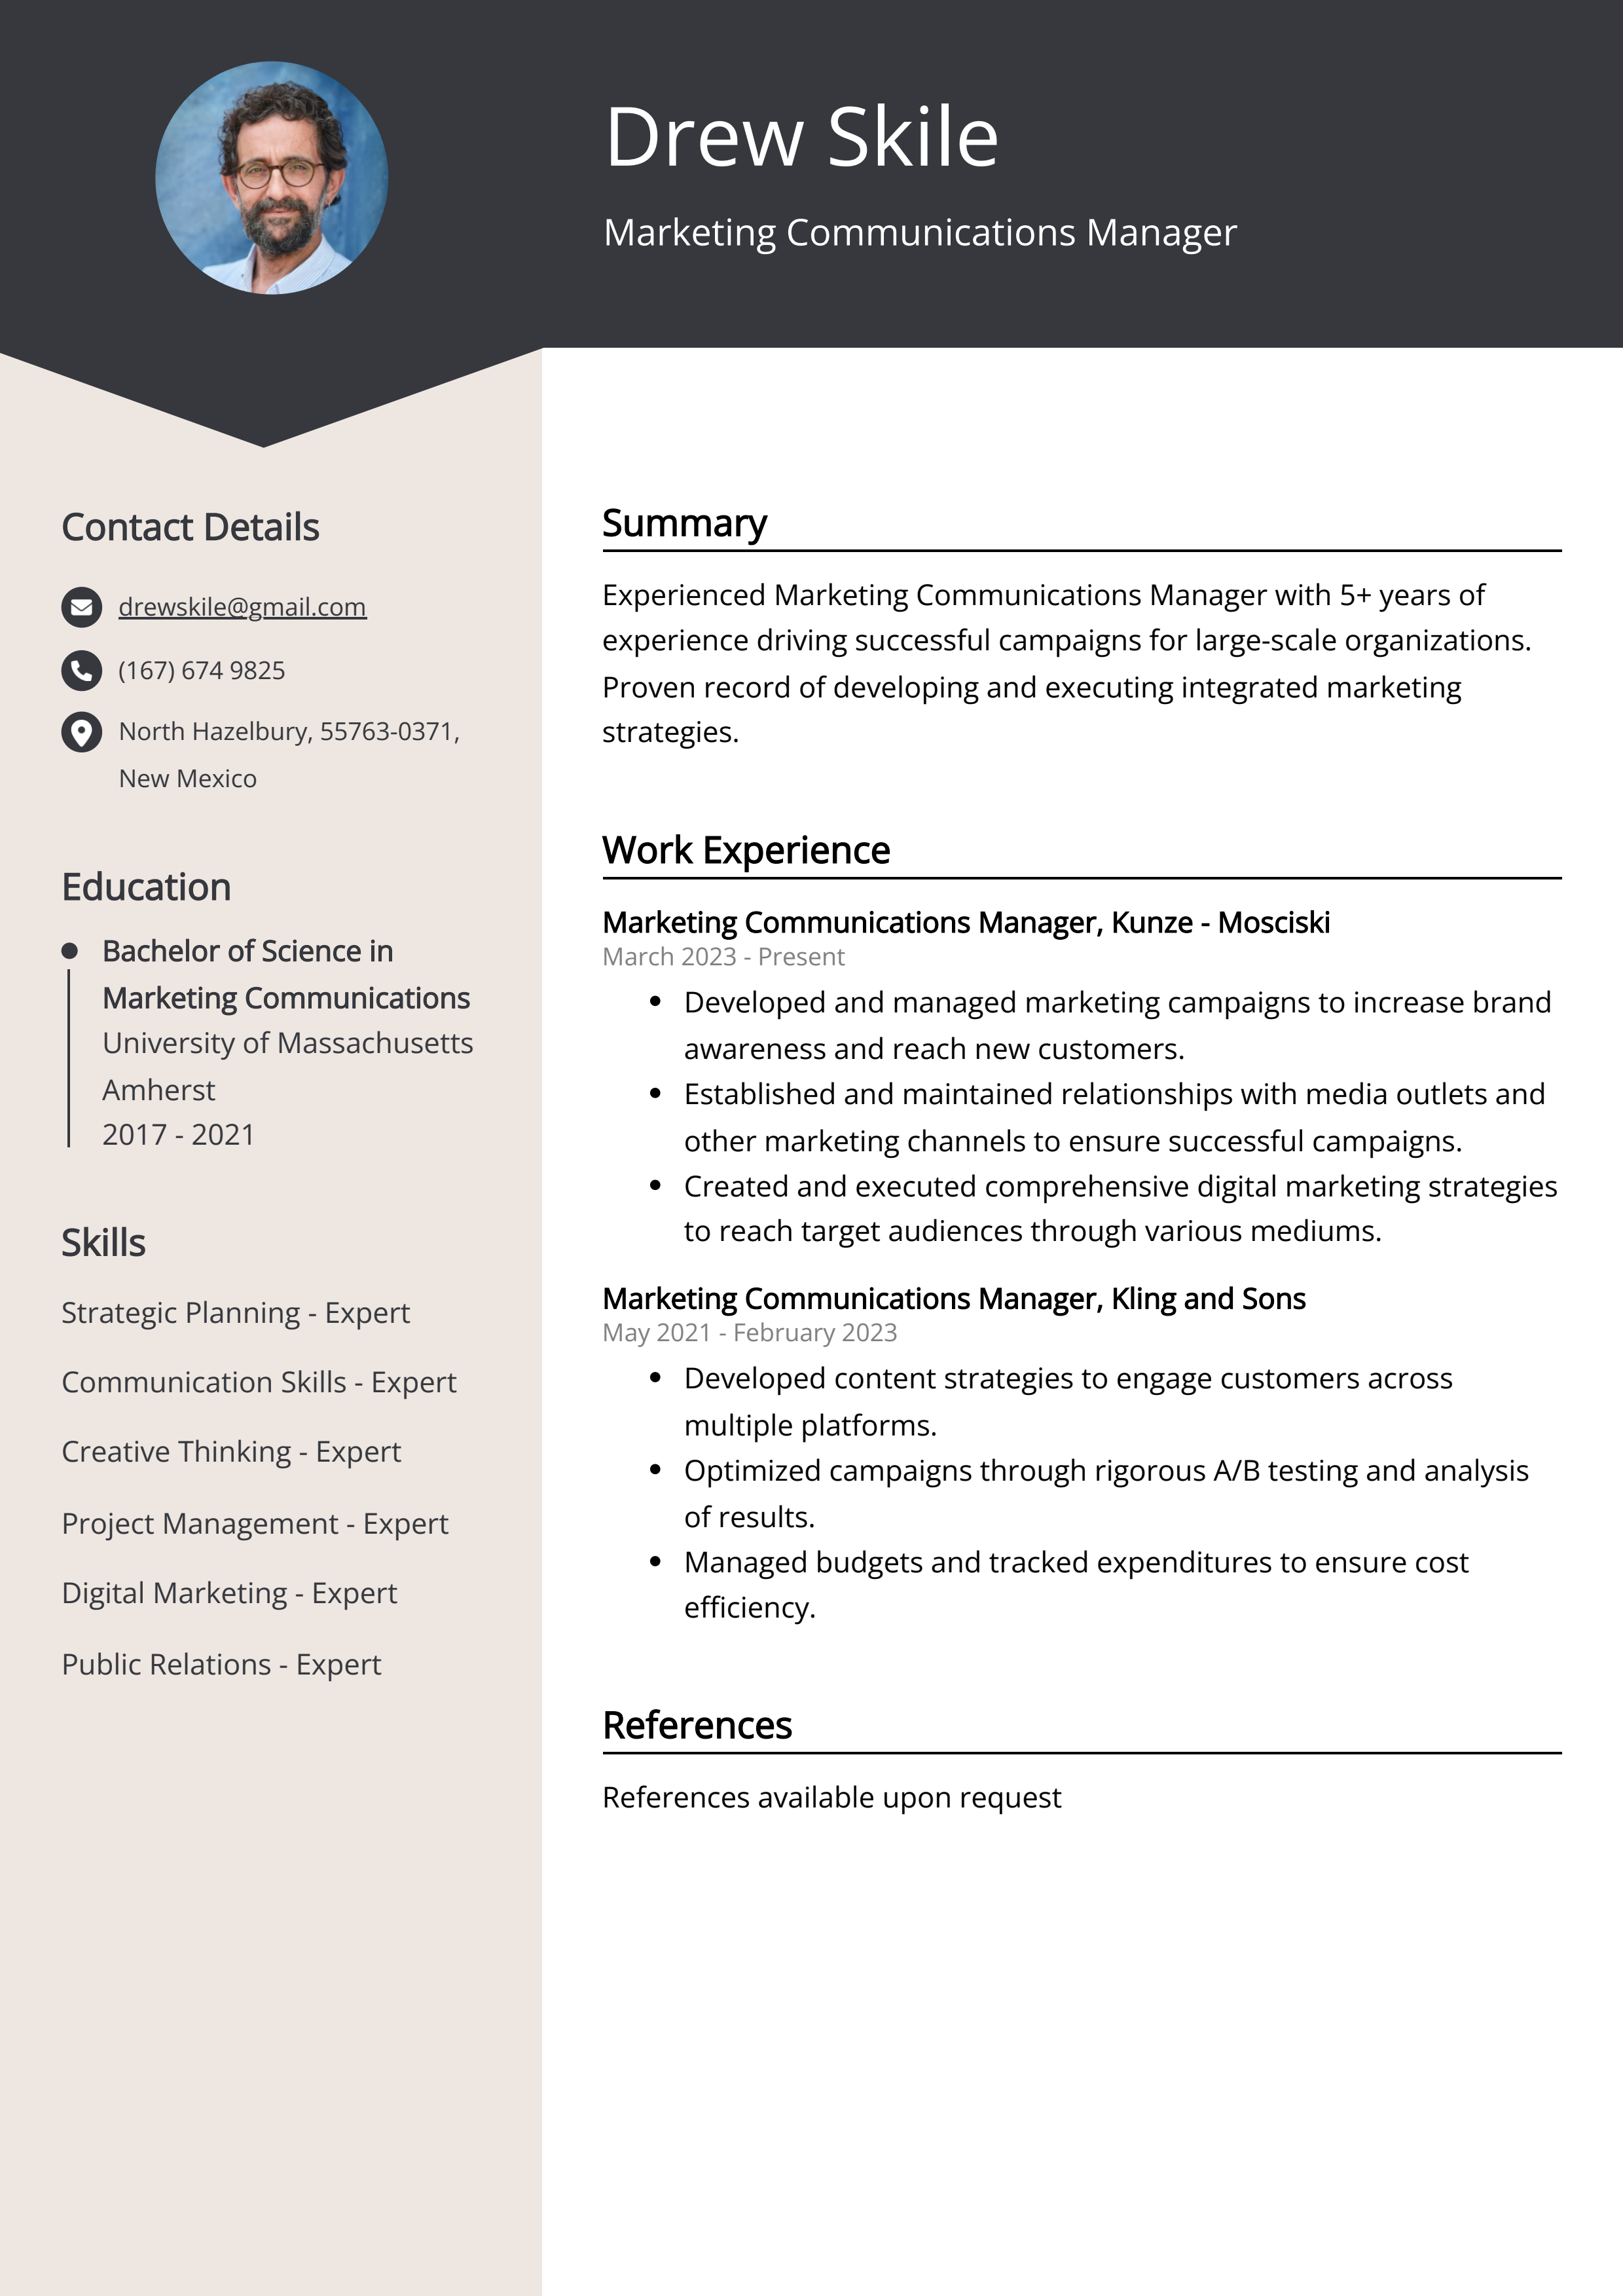 Marketing Communications Manager CV Example